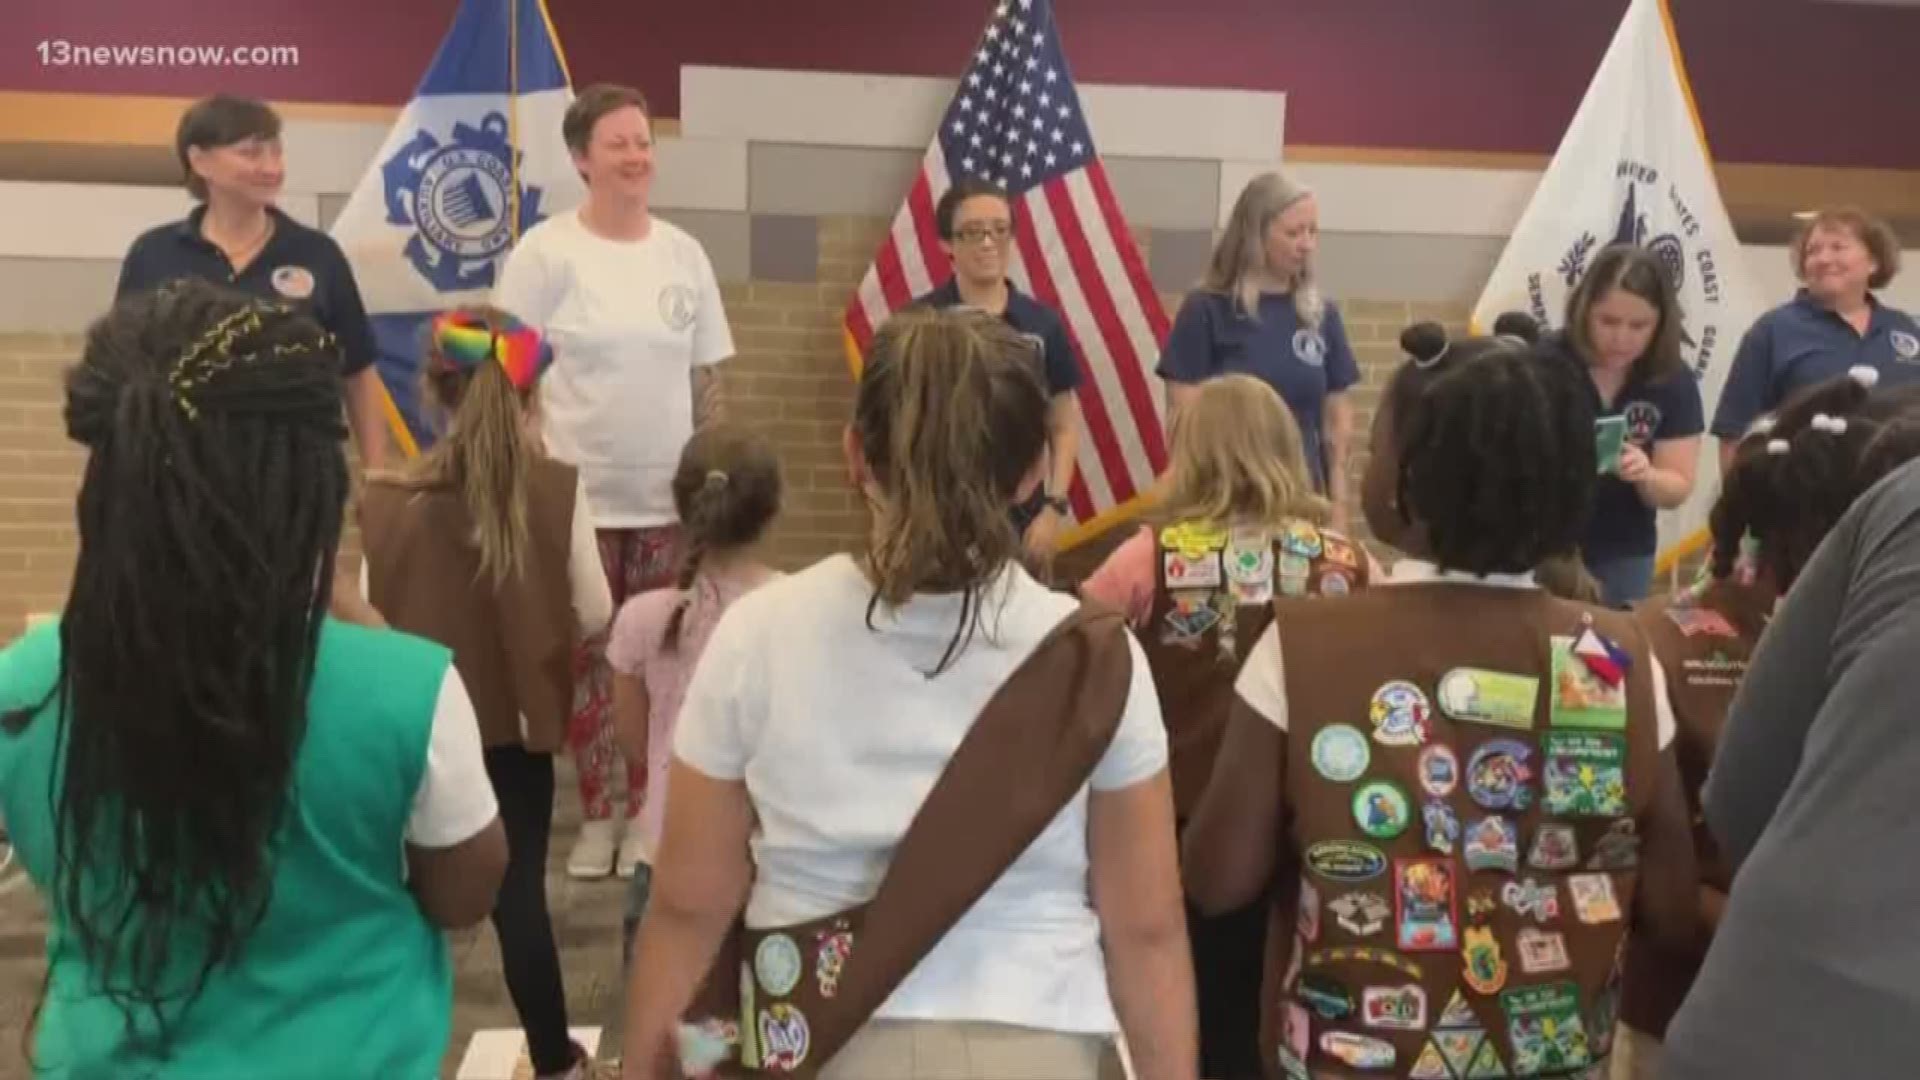 Girl Scouts visited the Coast Guard base in Portsmouth and participated in hands on activities. They learned to properly fold a flag, hot to tie knots, and more.